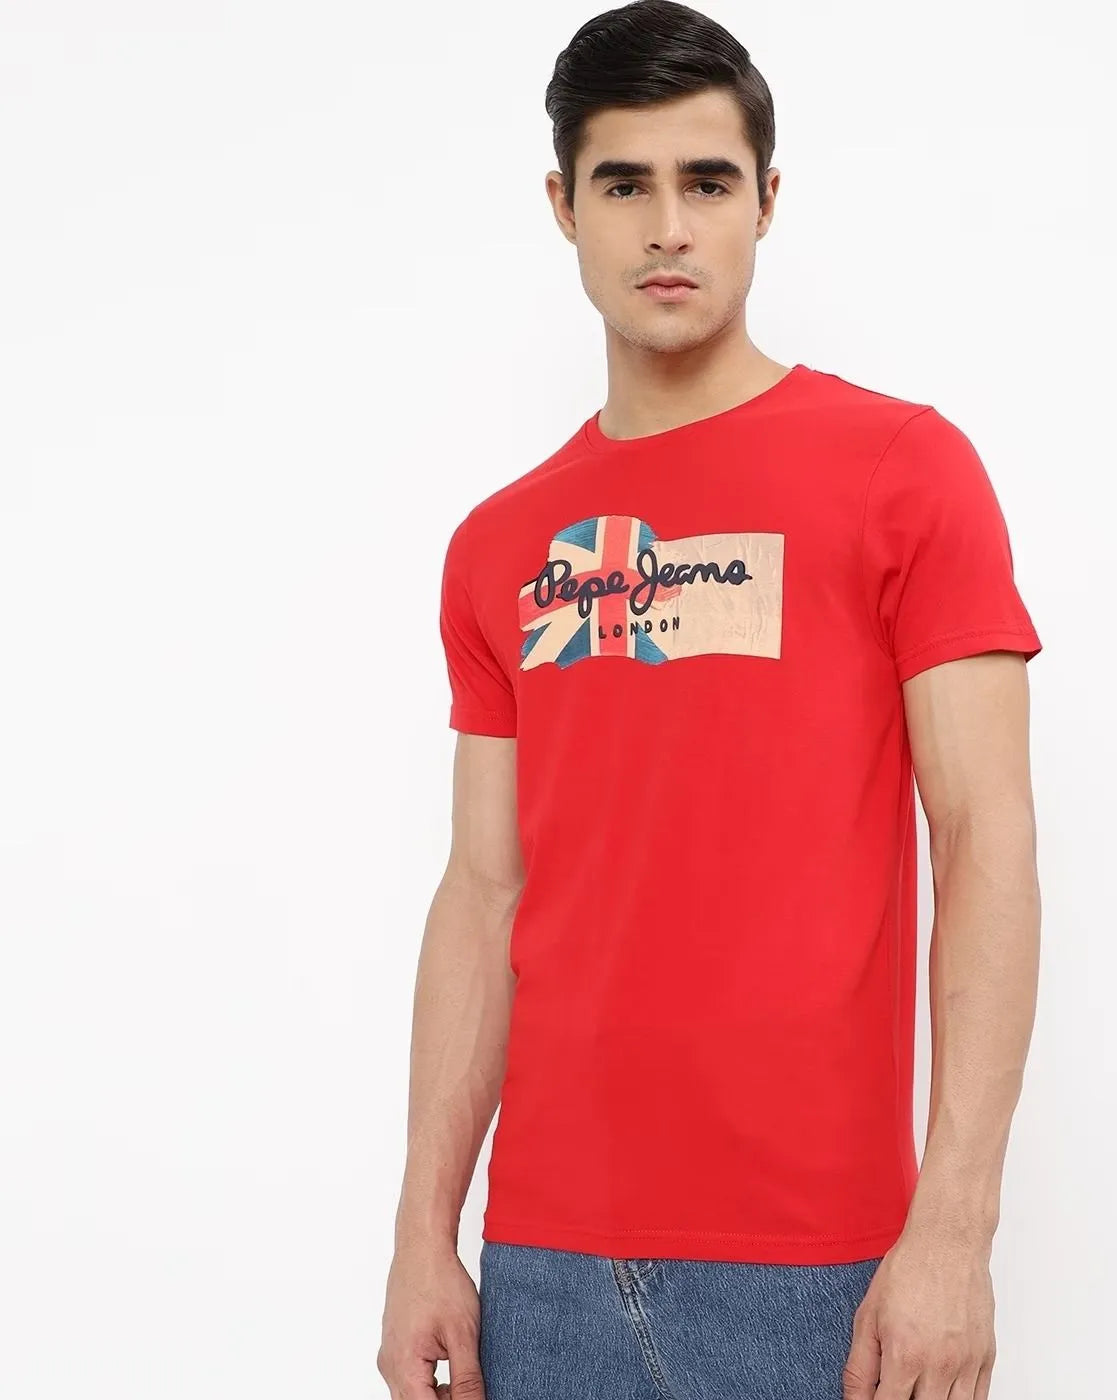 Pepe Jeans London T-Shirt: Channel iconic London style with this slim-fit tee featuring a bold flag print.Pepe Jeans London T-Shirt: Channel iconic London style with this slim-fit tee featuring a bold flag print.